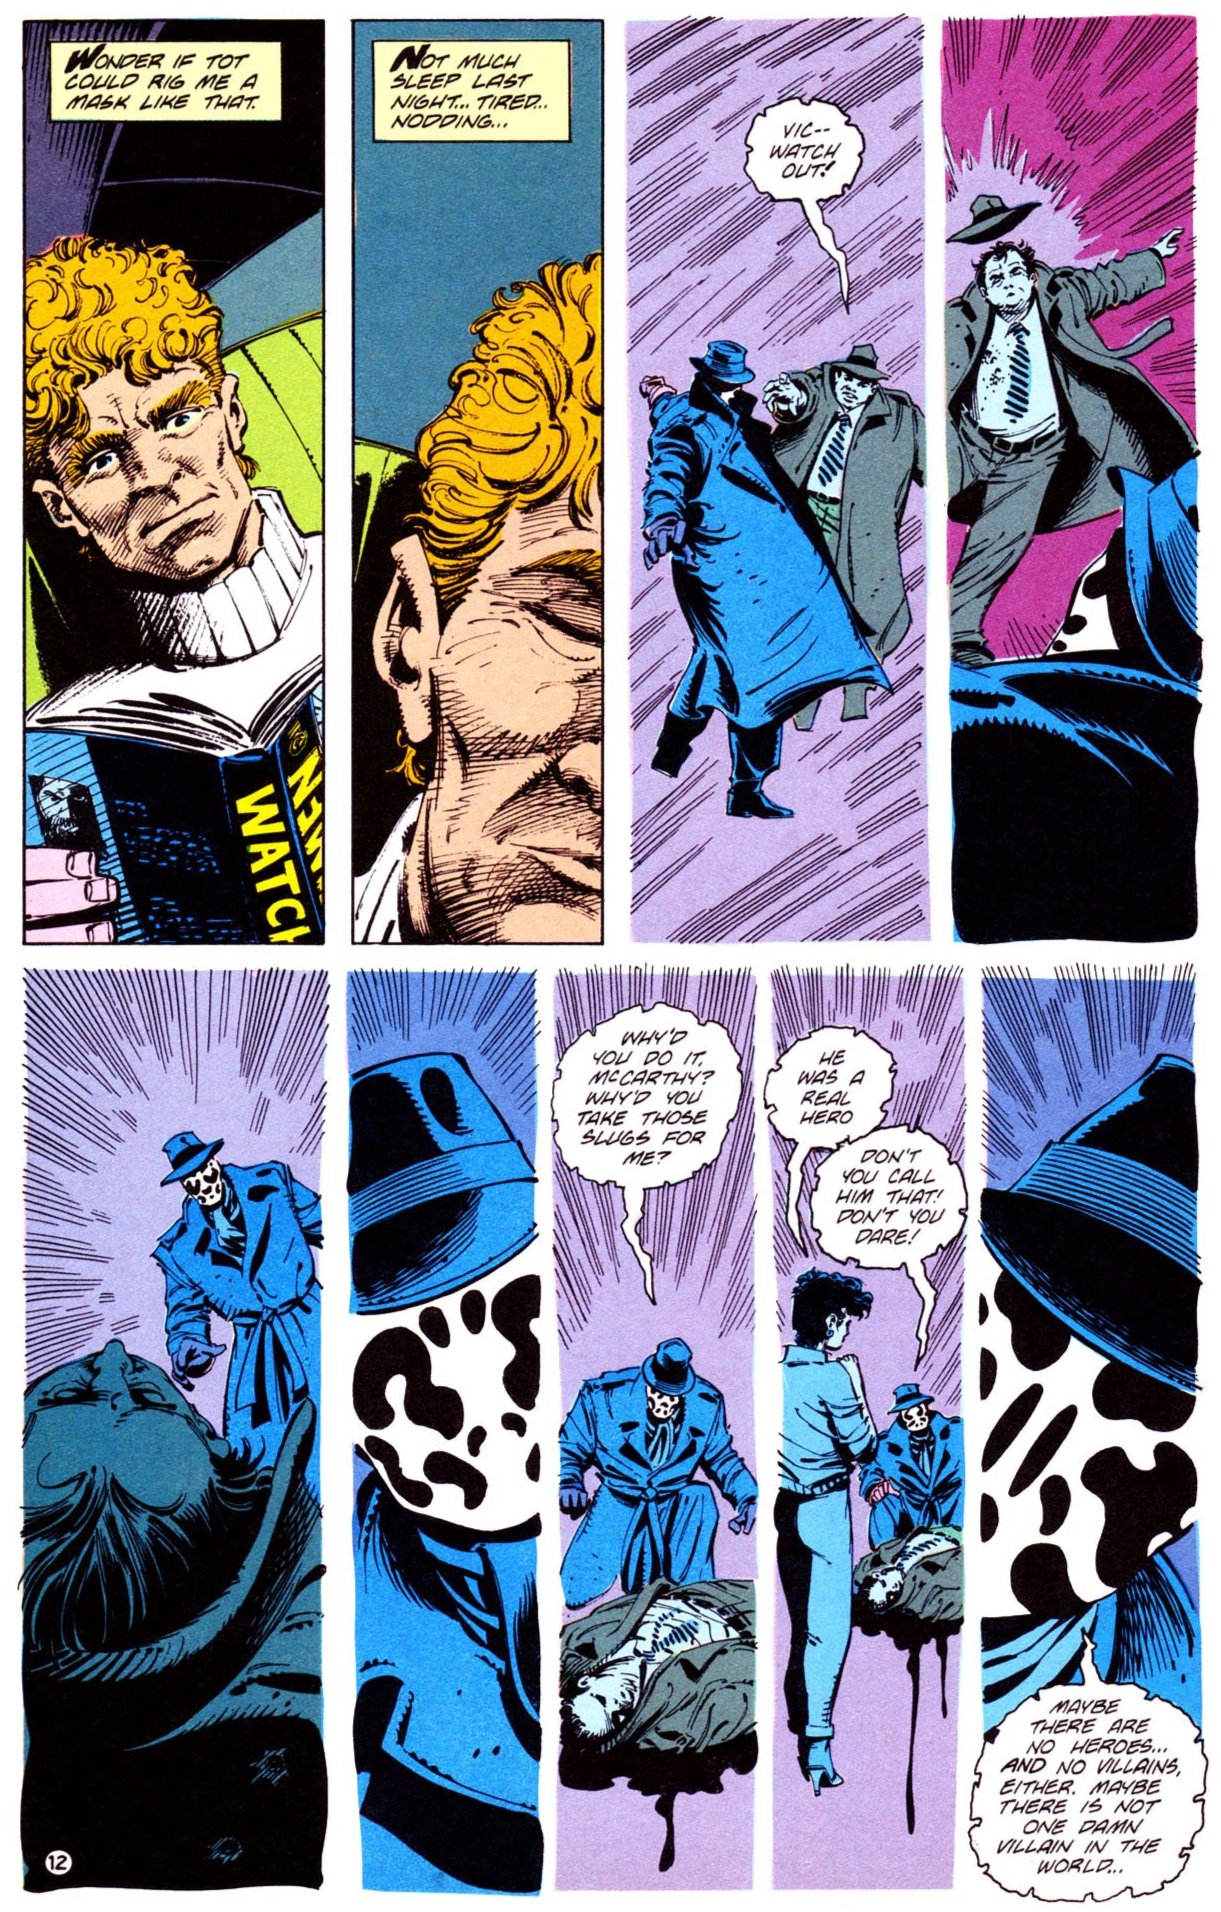 Alan Moore's Watchmen & Rorschach  Does He Set A Bad Example?